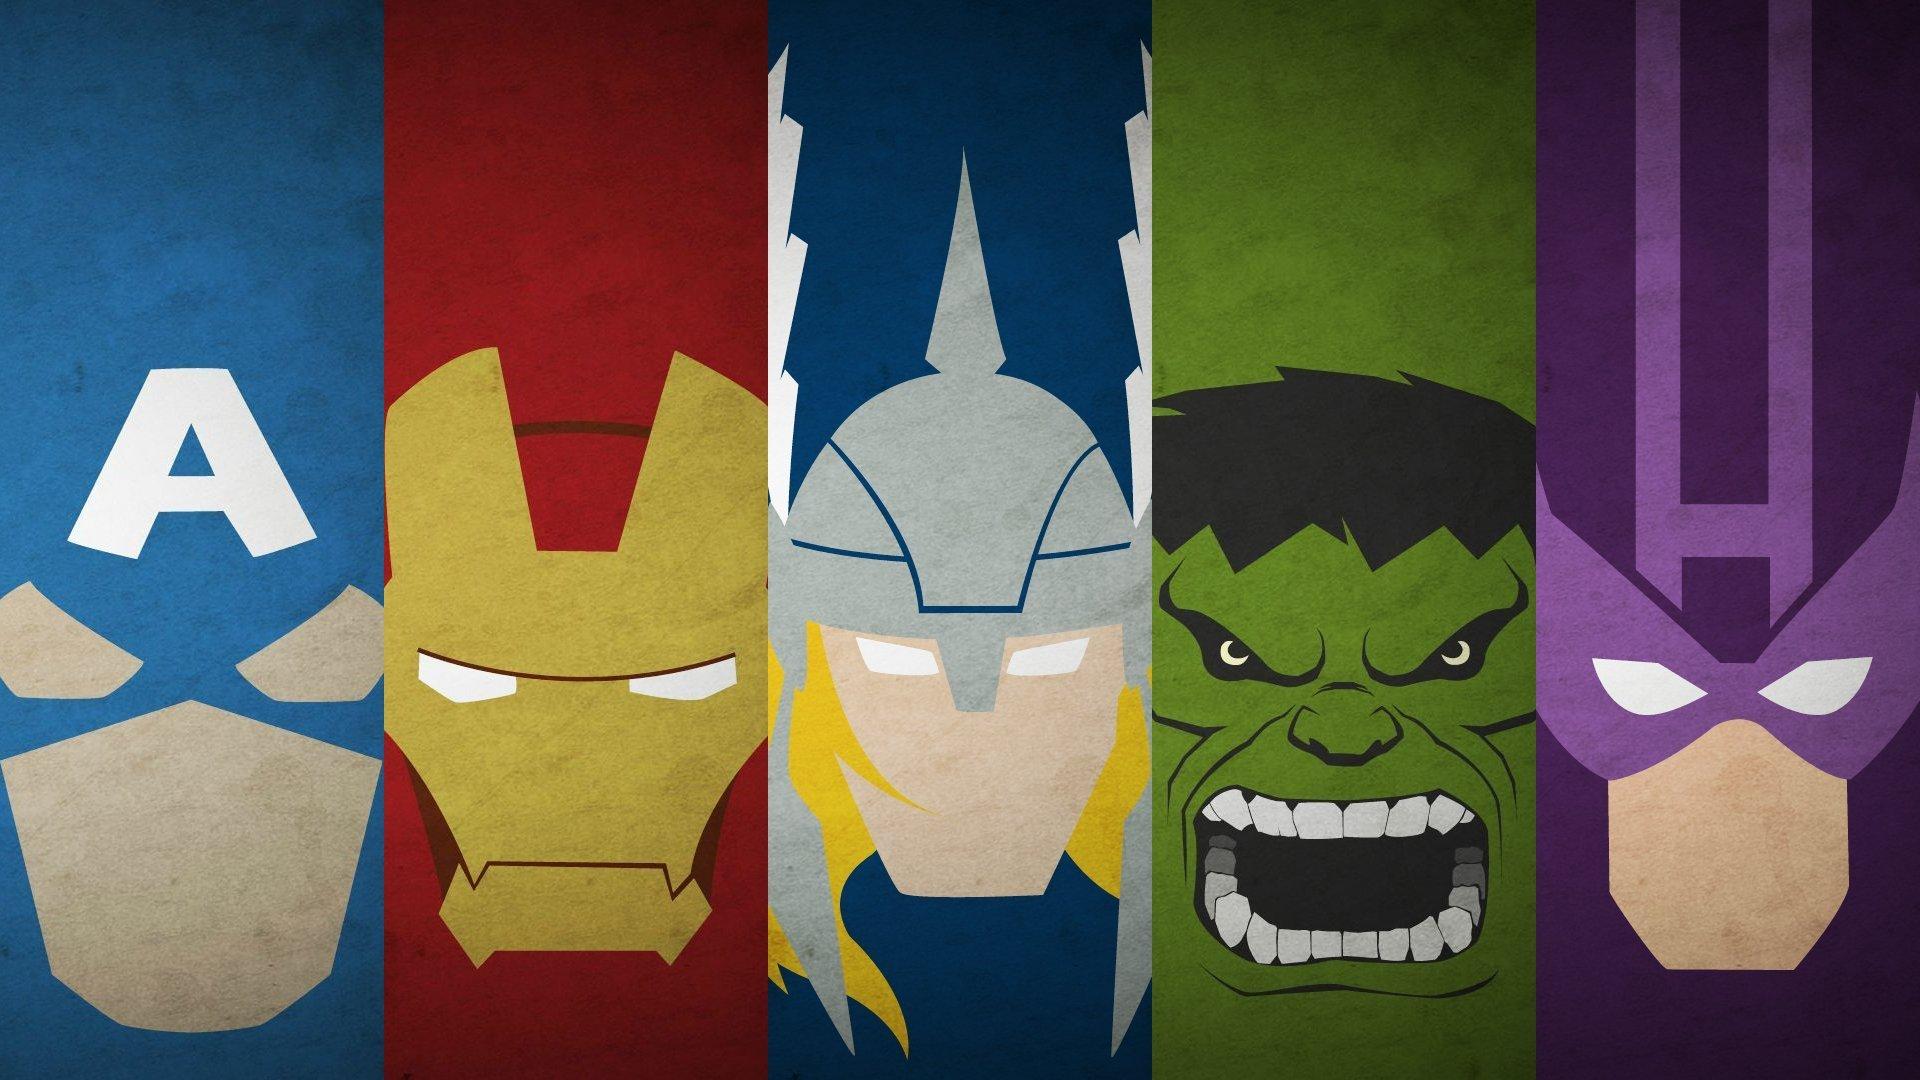 Minimalist HD Avengers Wallpaper to get you ready for Infinity